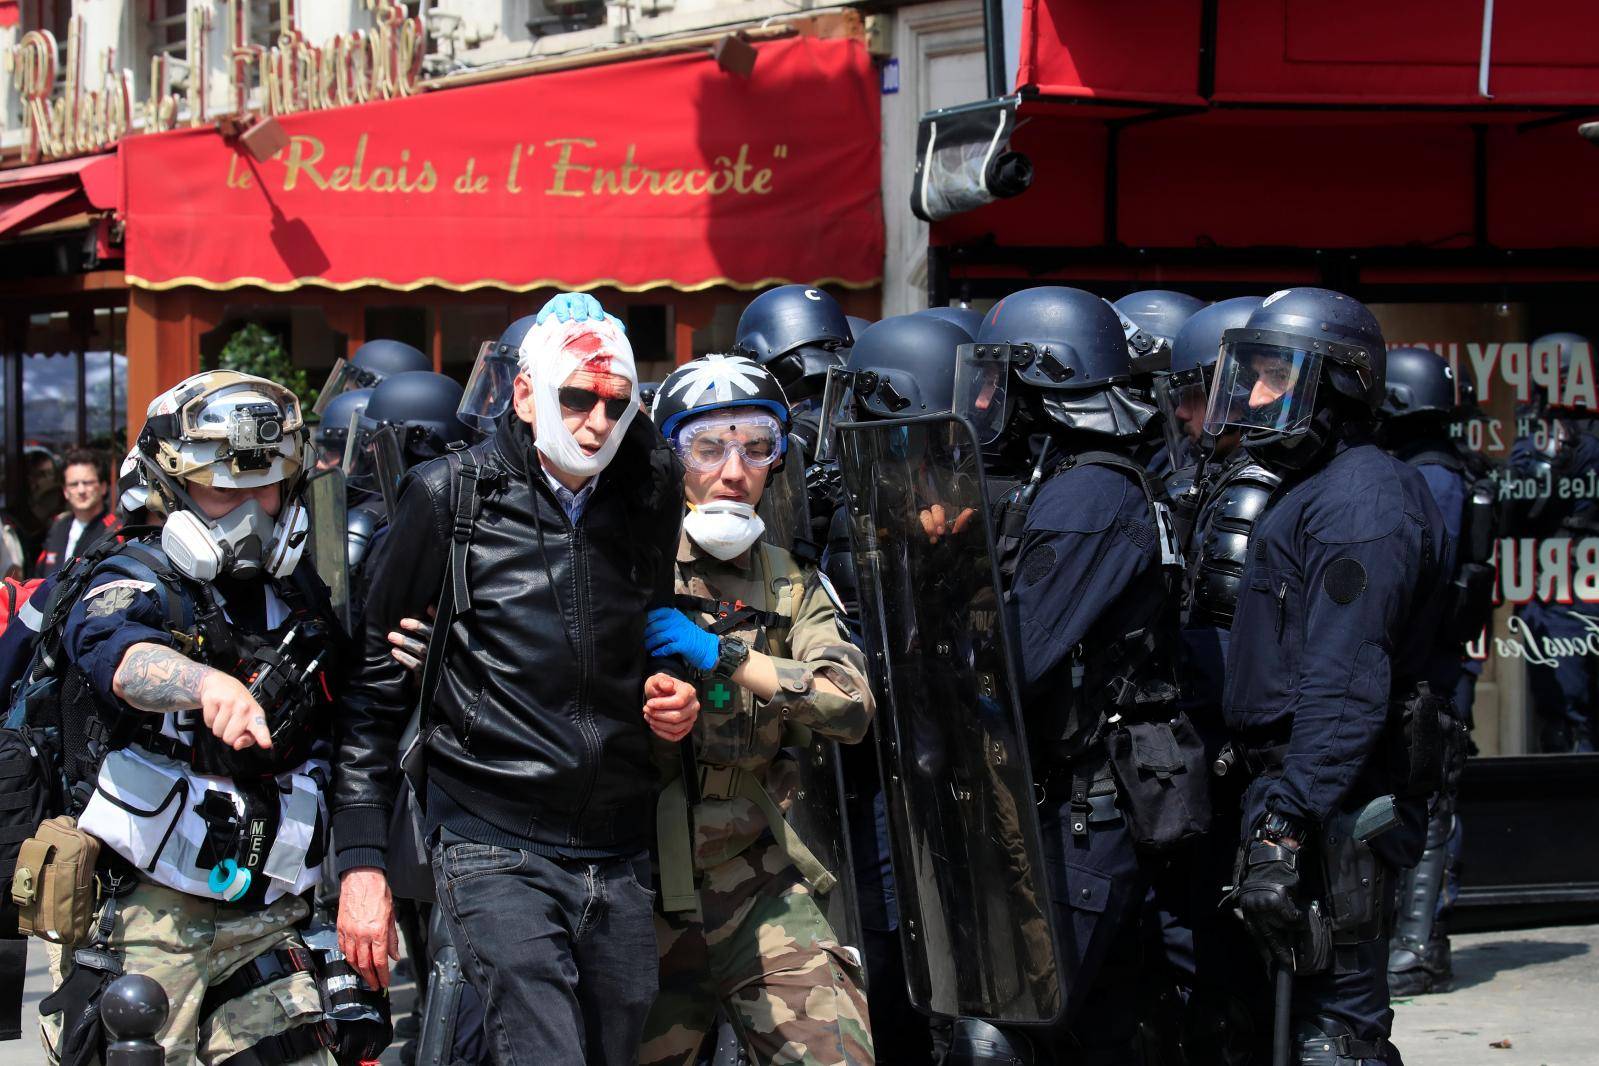 An injured protester is evacuated by street medics after clashes before the start of the traditional May Day labour union march in Paris